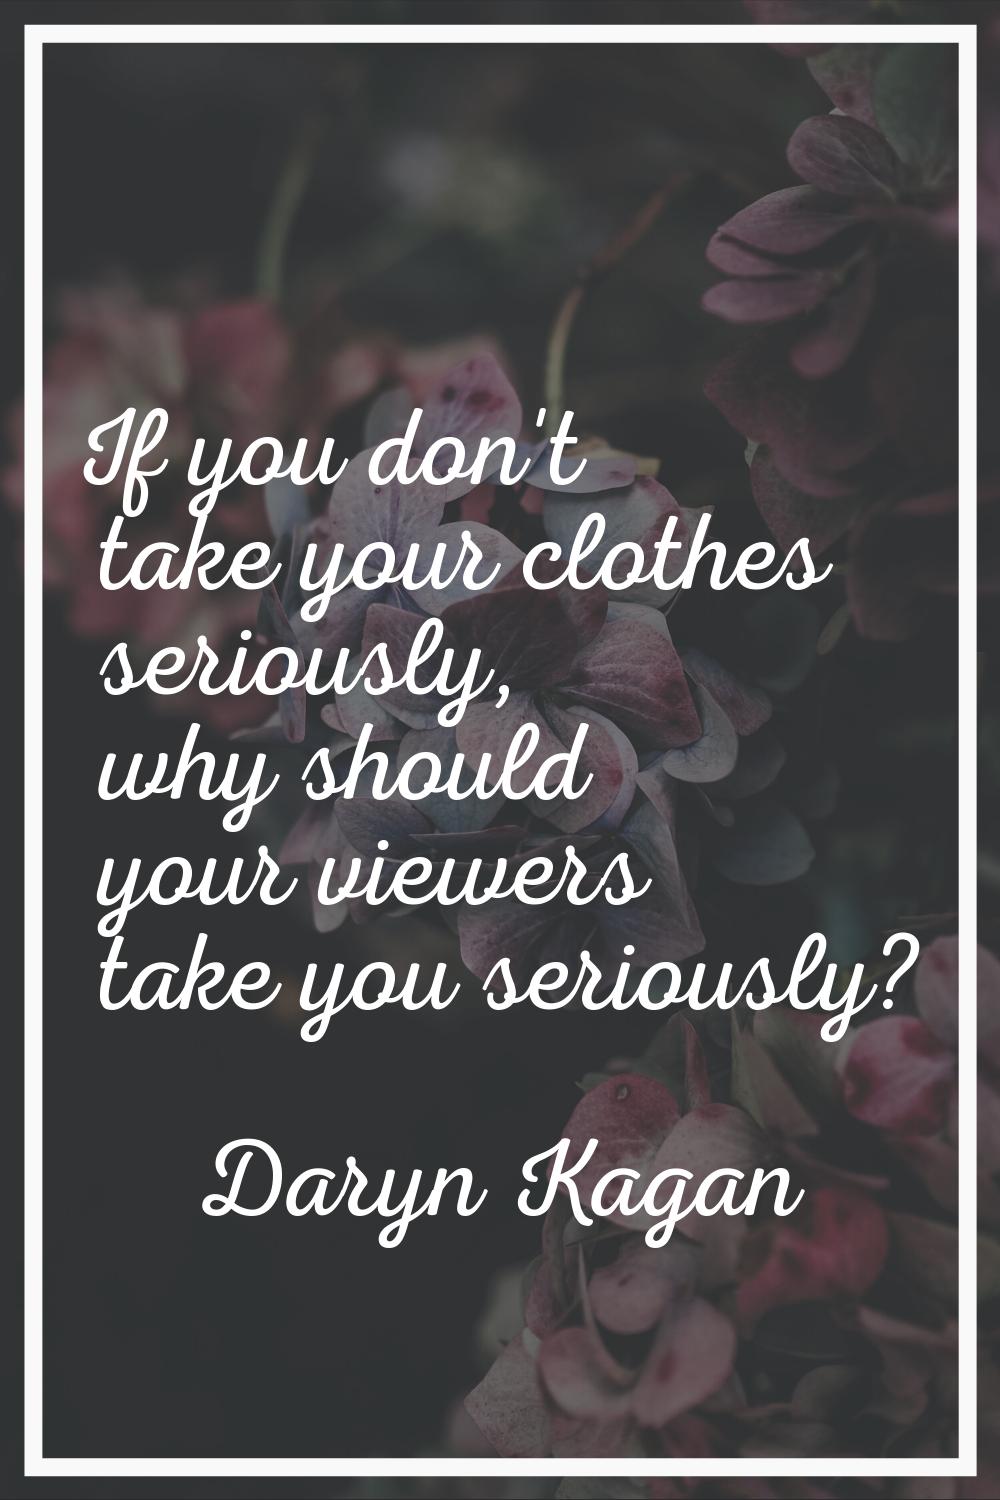 If you don't take your clothes seriously, why should your viewers take you seriously?